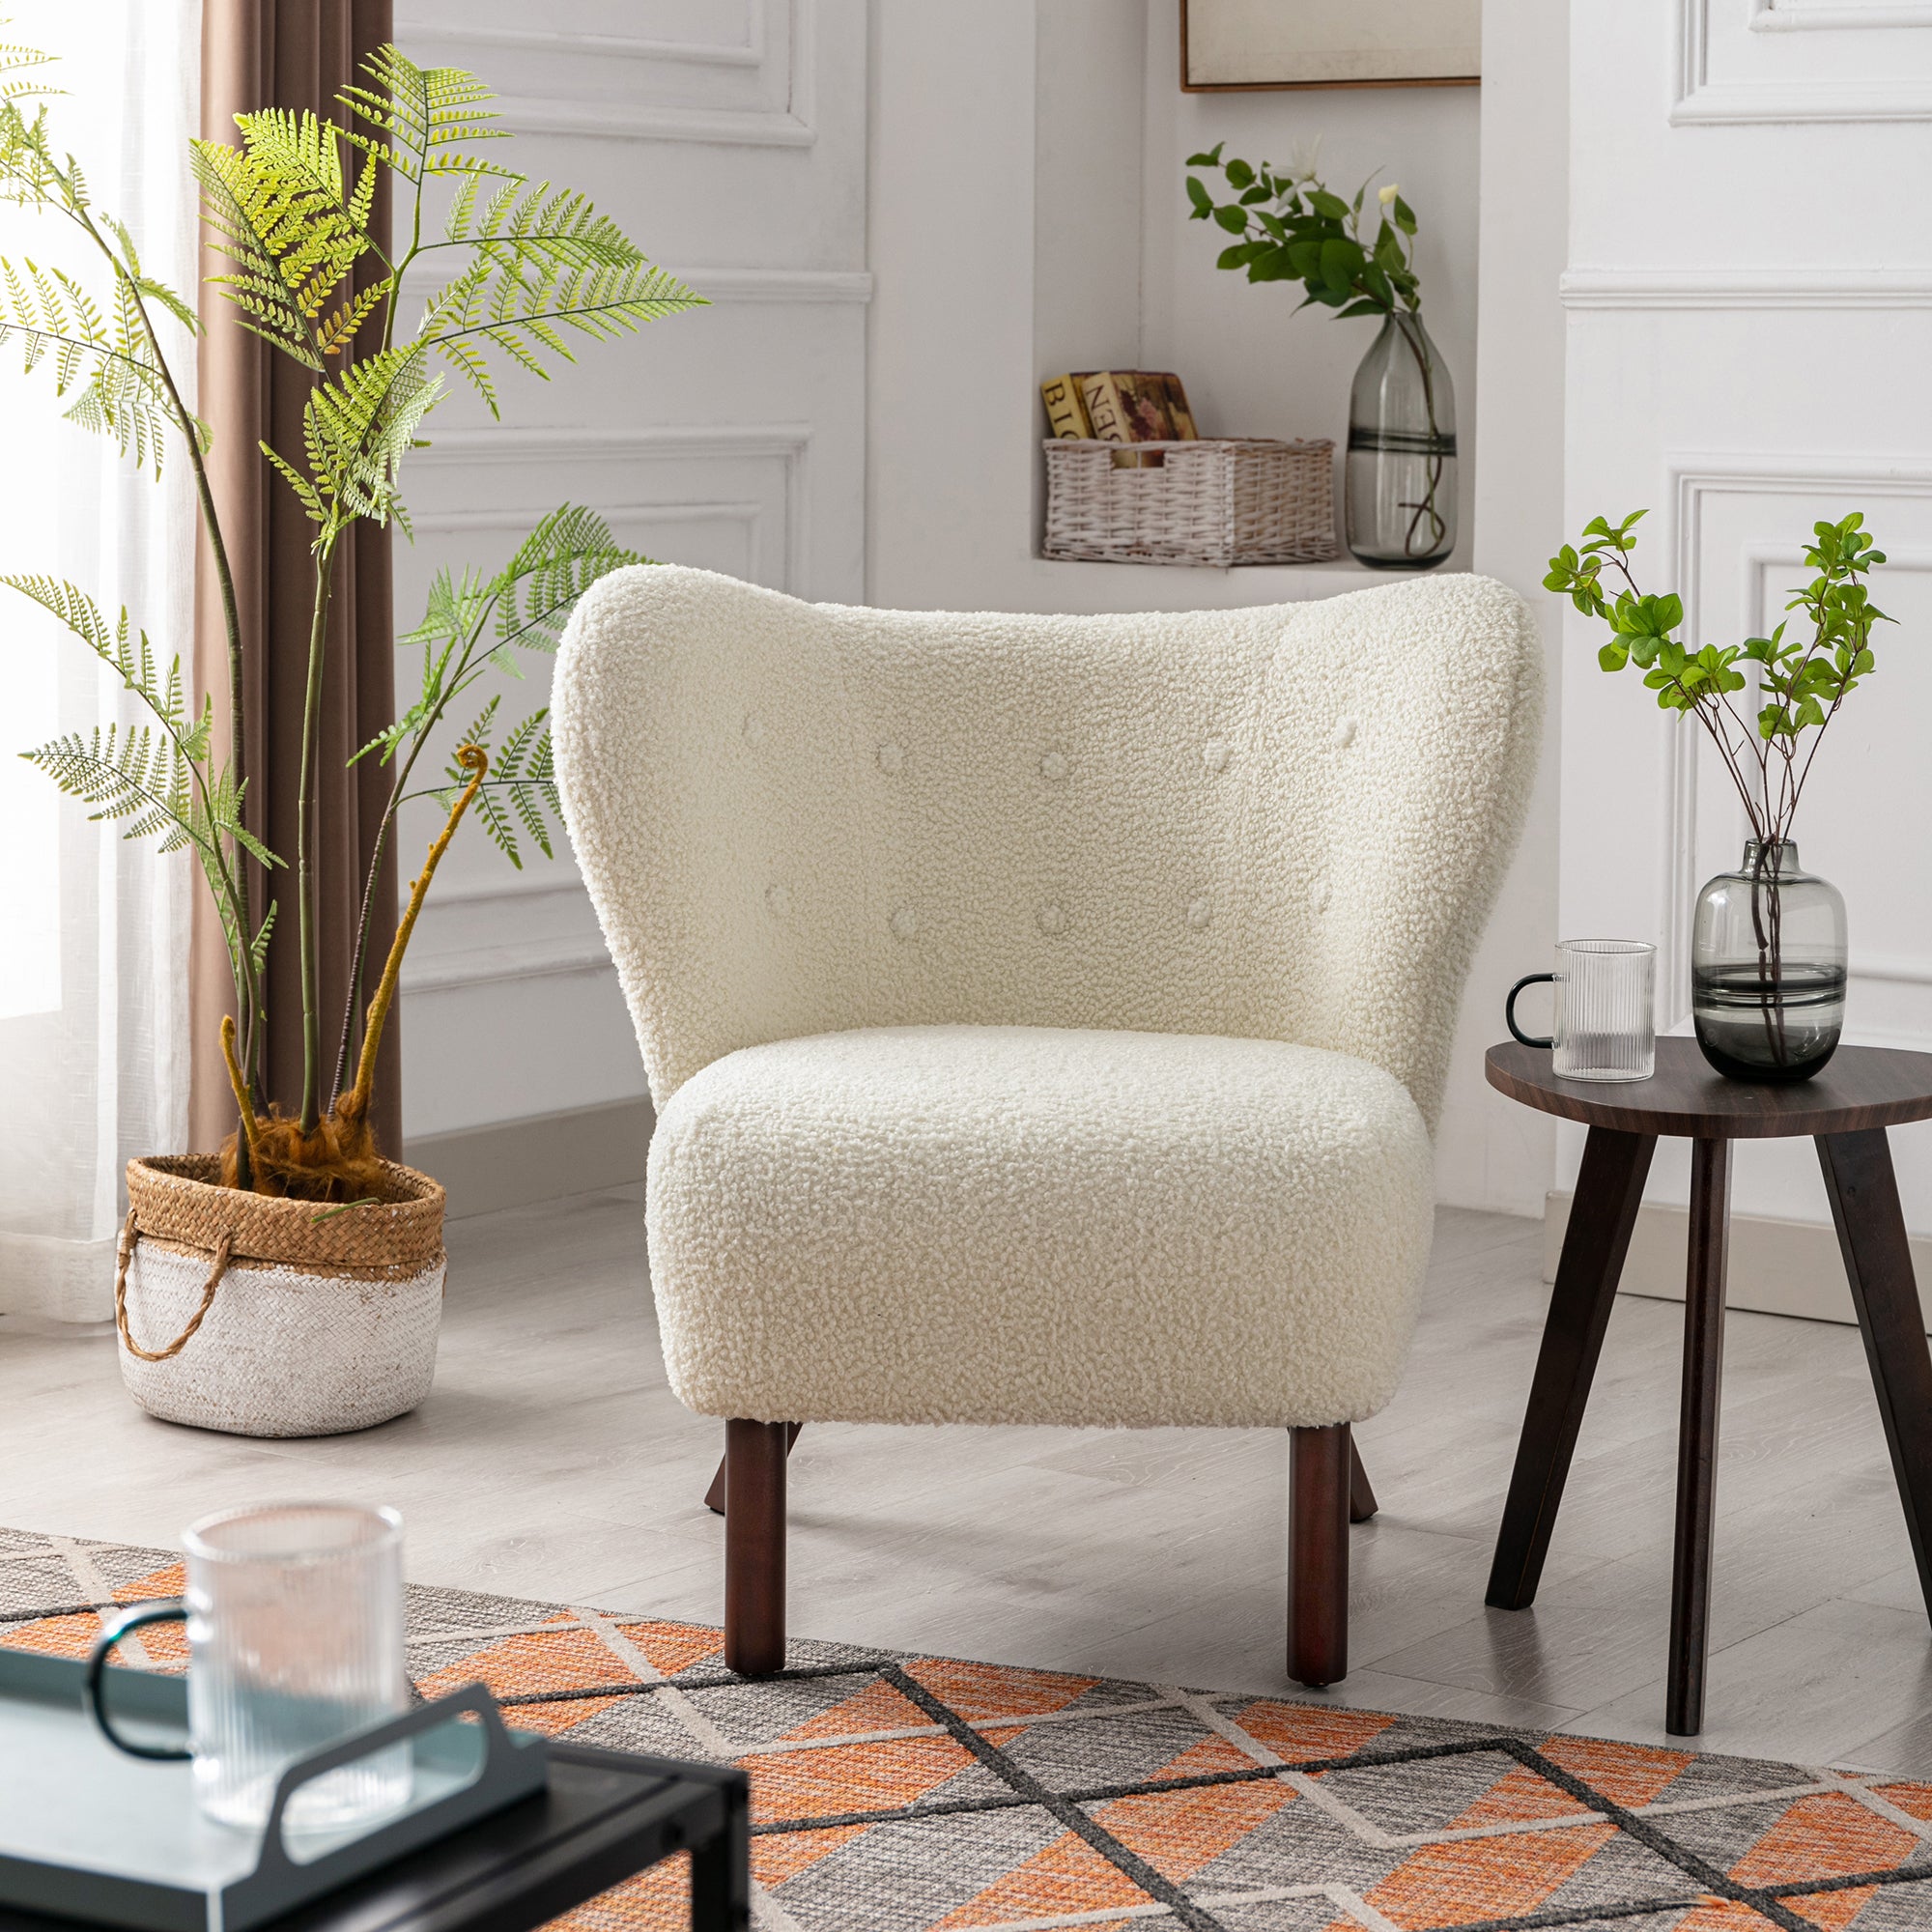 Modern Accent Chair Lambskin Sherpa Wingback Tufted cream-polyester